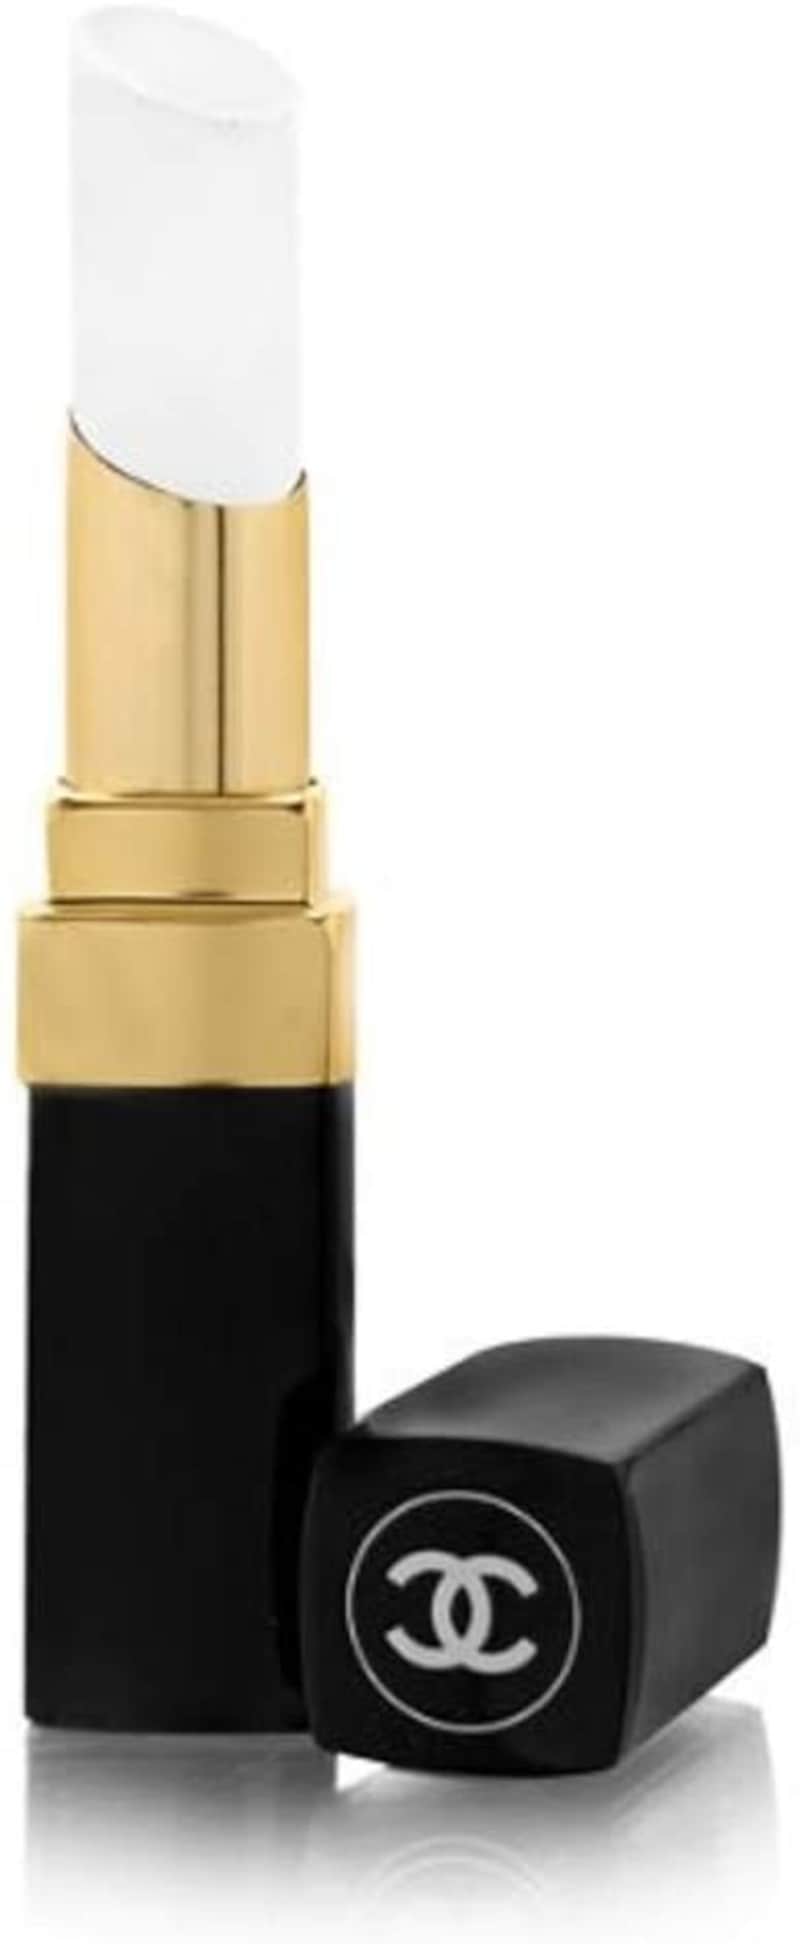 CHANEL ,ROUGE COCO BAUME,chanel-008-wp